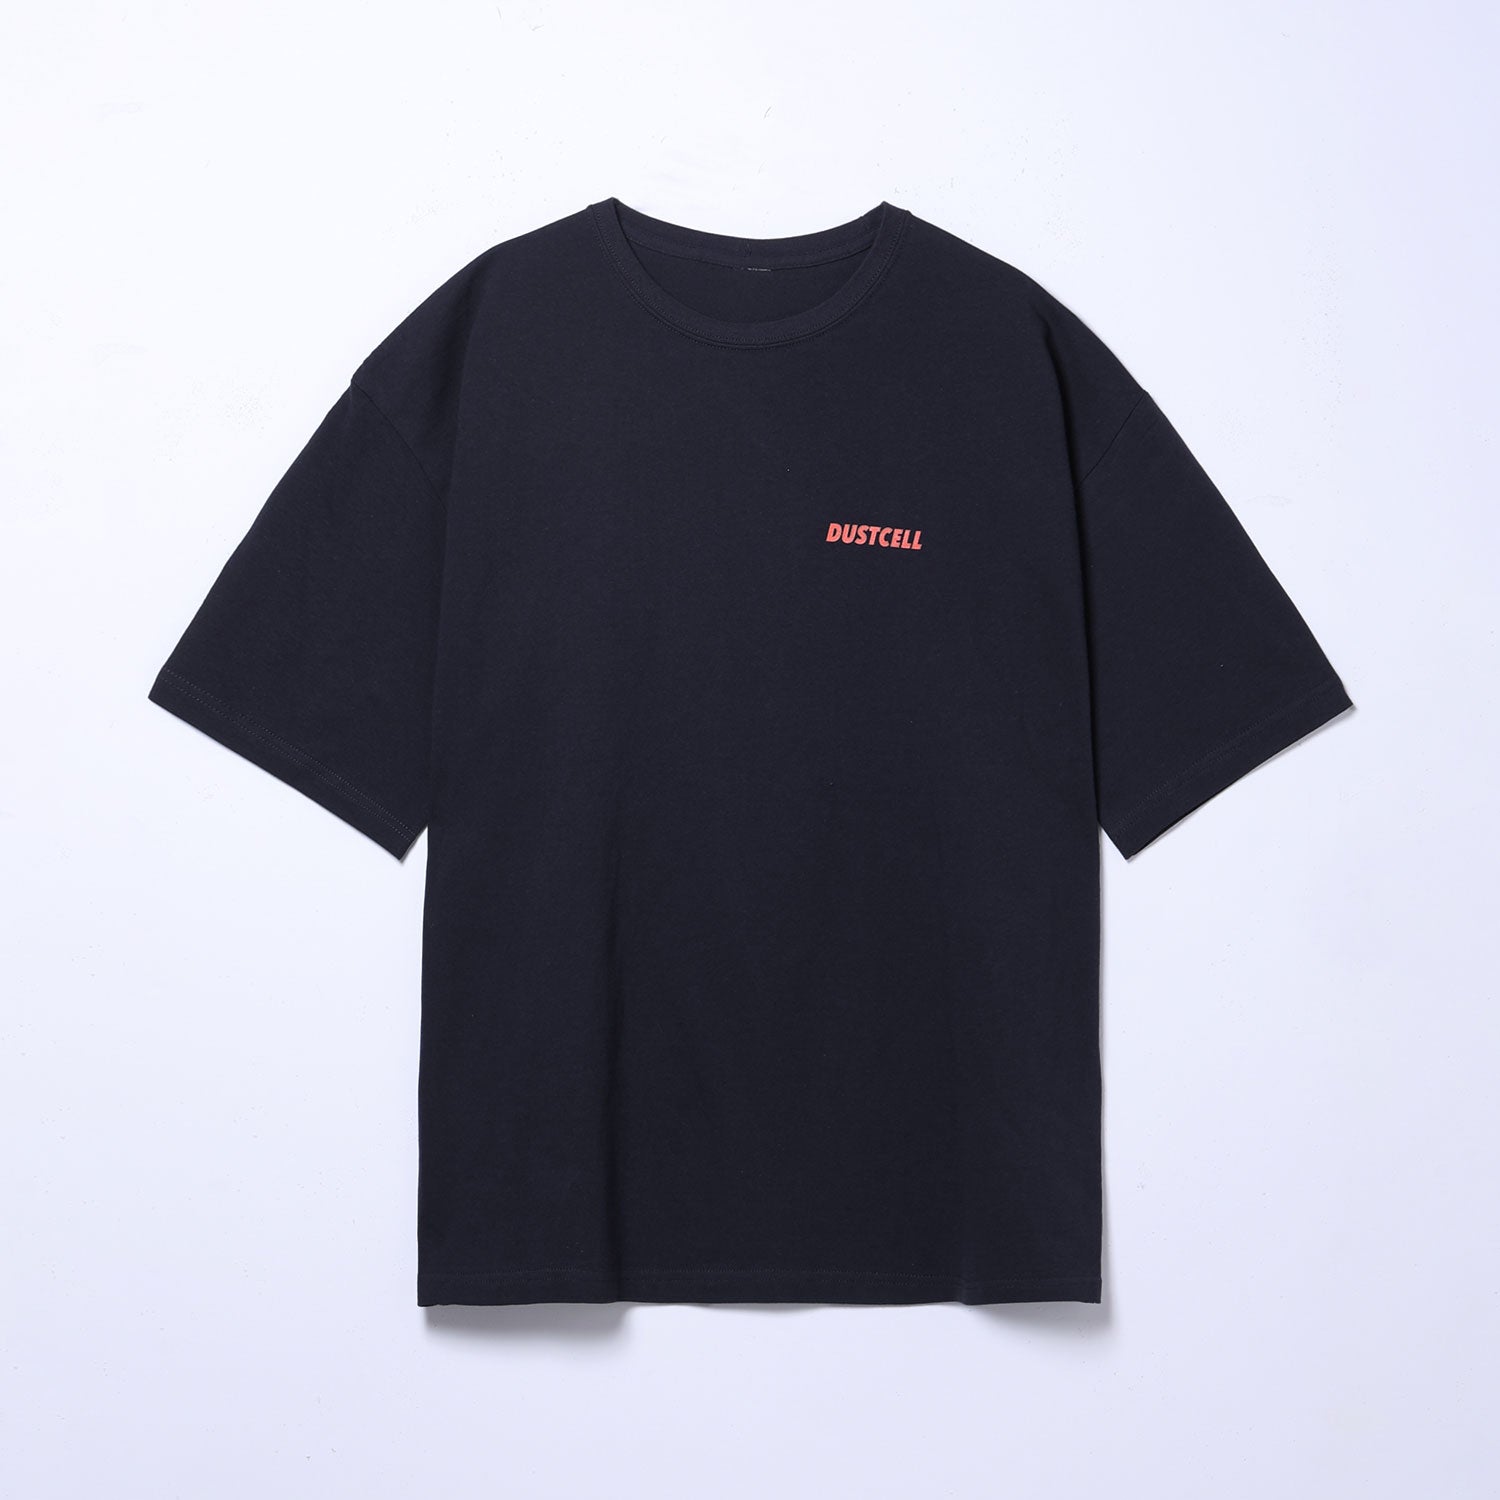 DUSTCELL】ビックシルエットTシャツ A／BLACK／TOUR「ROUND TRIP